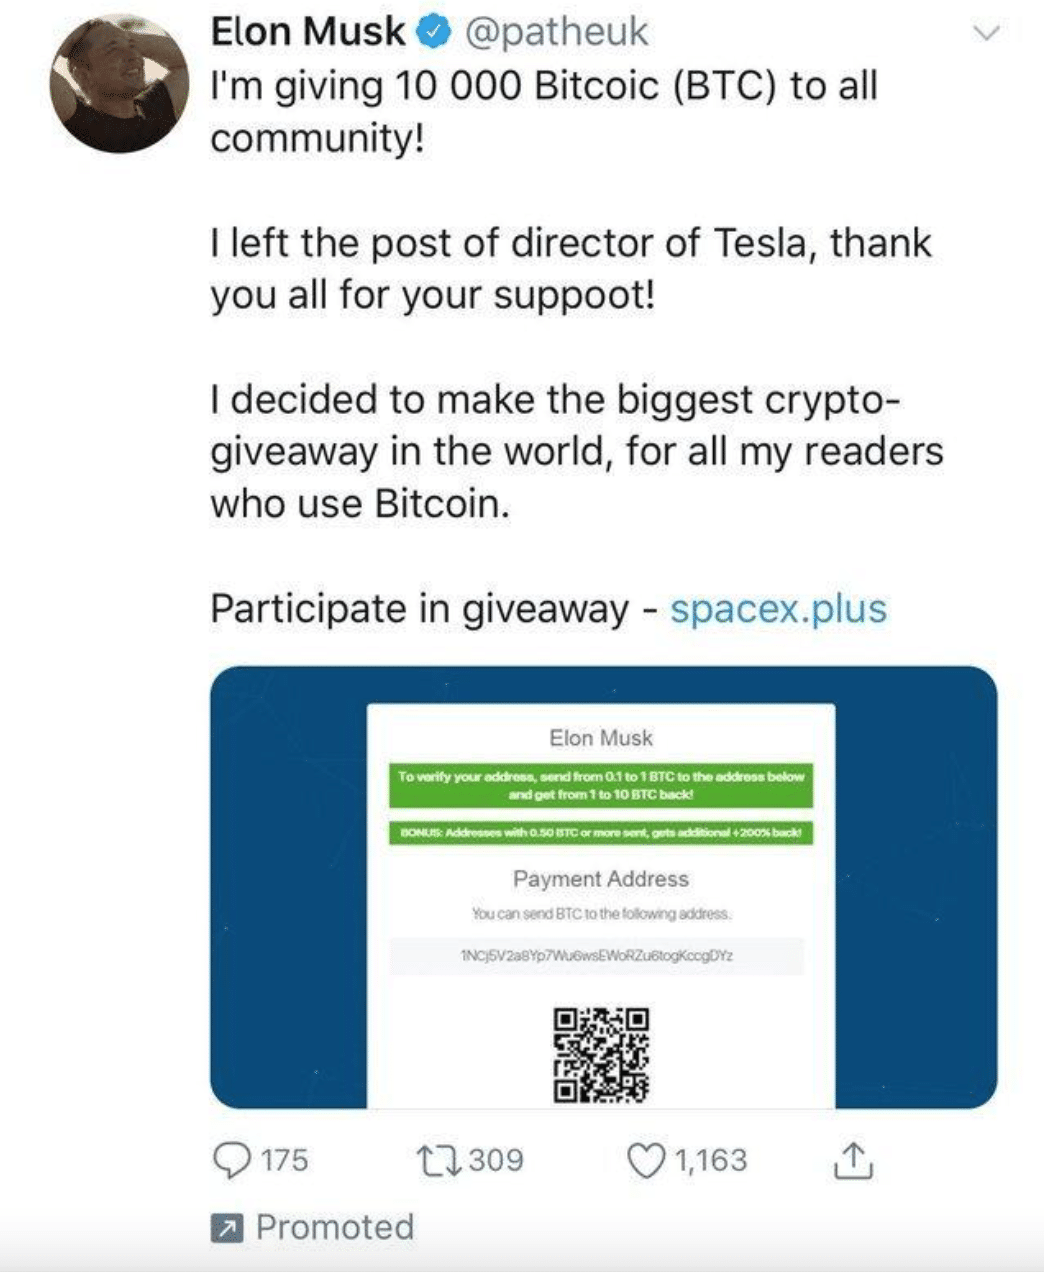 An example of a fake Bitcoin giveaway scam